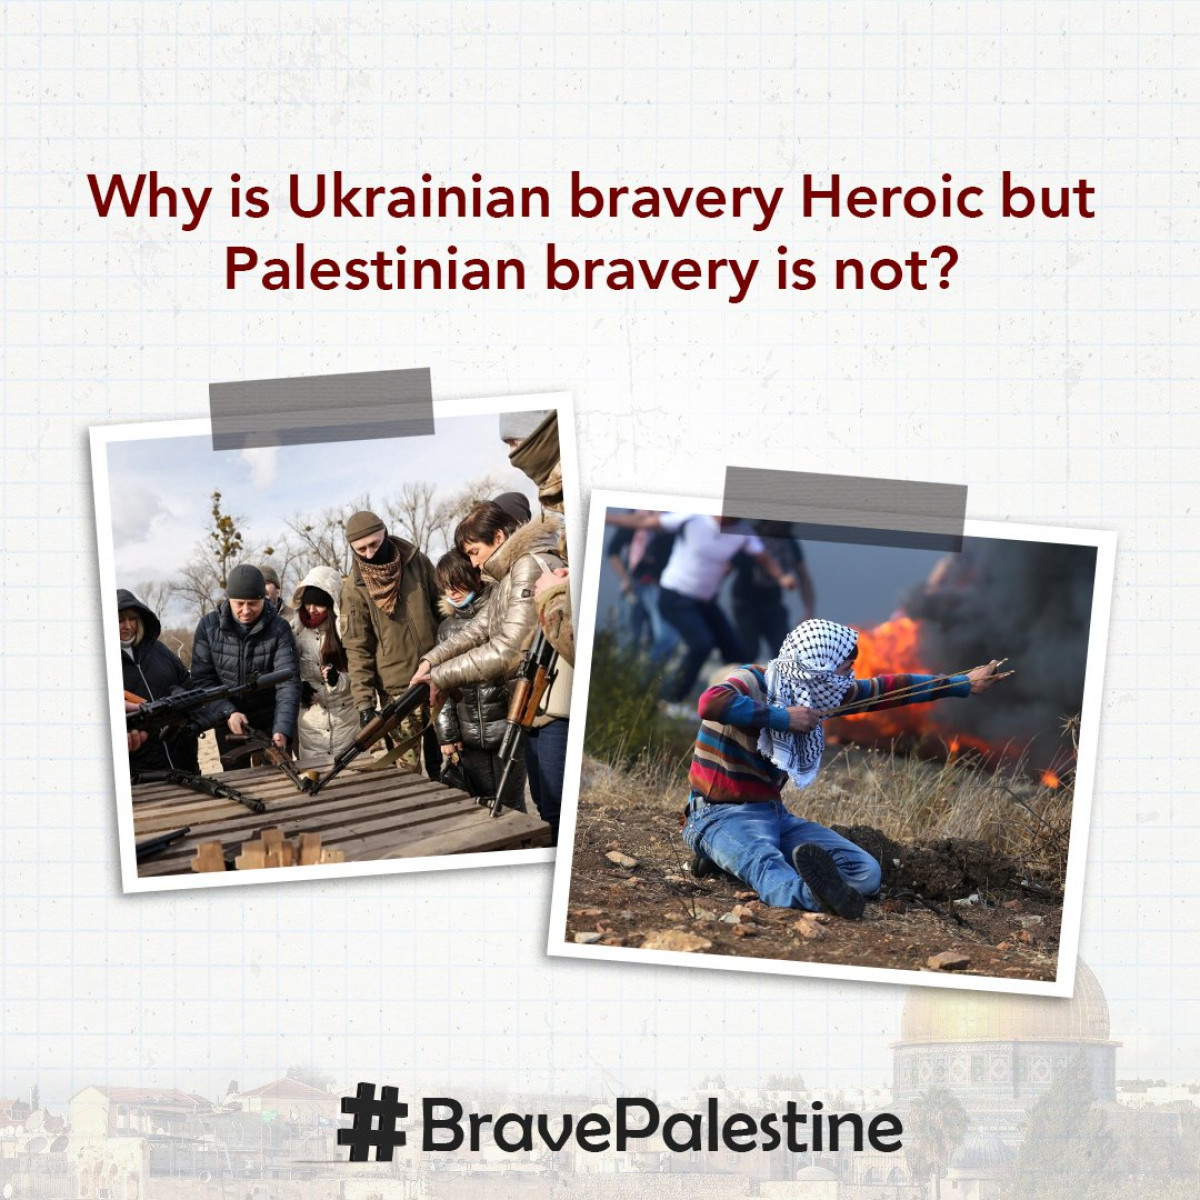 Why is Ukrainian bravery Heroic but Palestinian bravery is not?